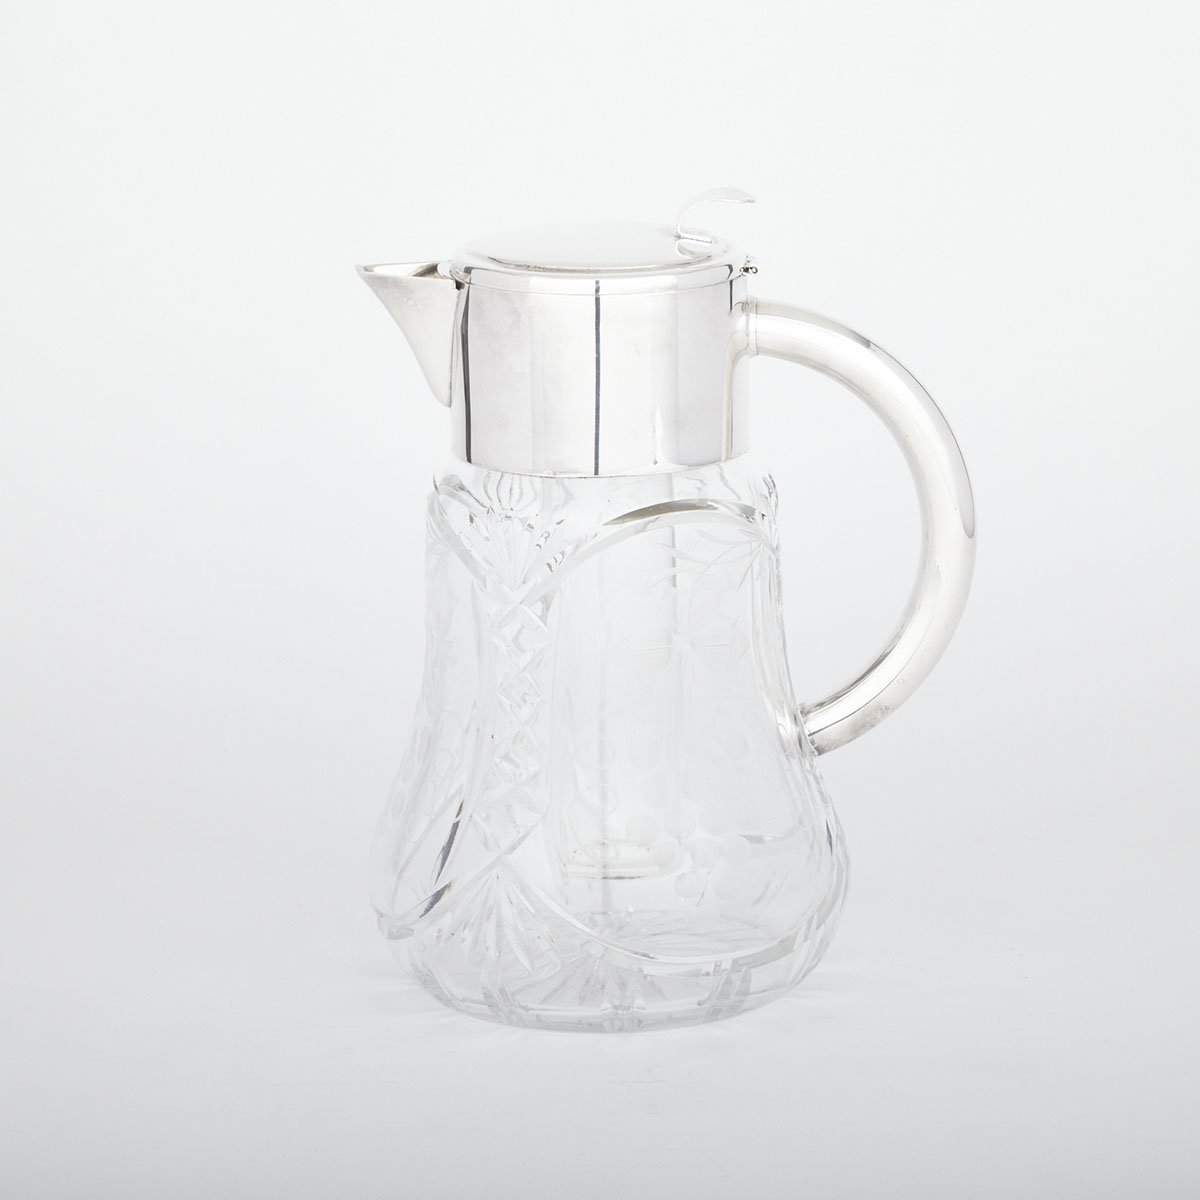 Silver Plate Mounted Cut and Etched Glass Sangria or Lemonade Jug, 20th century